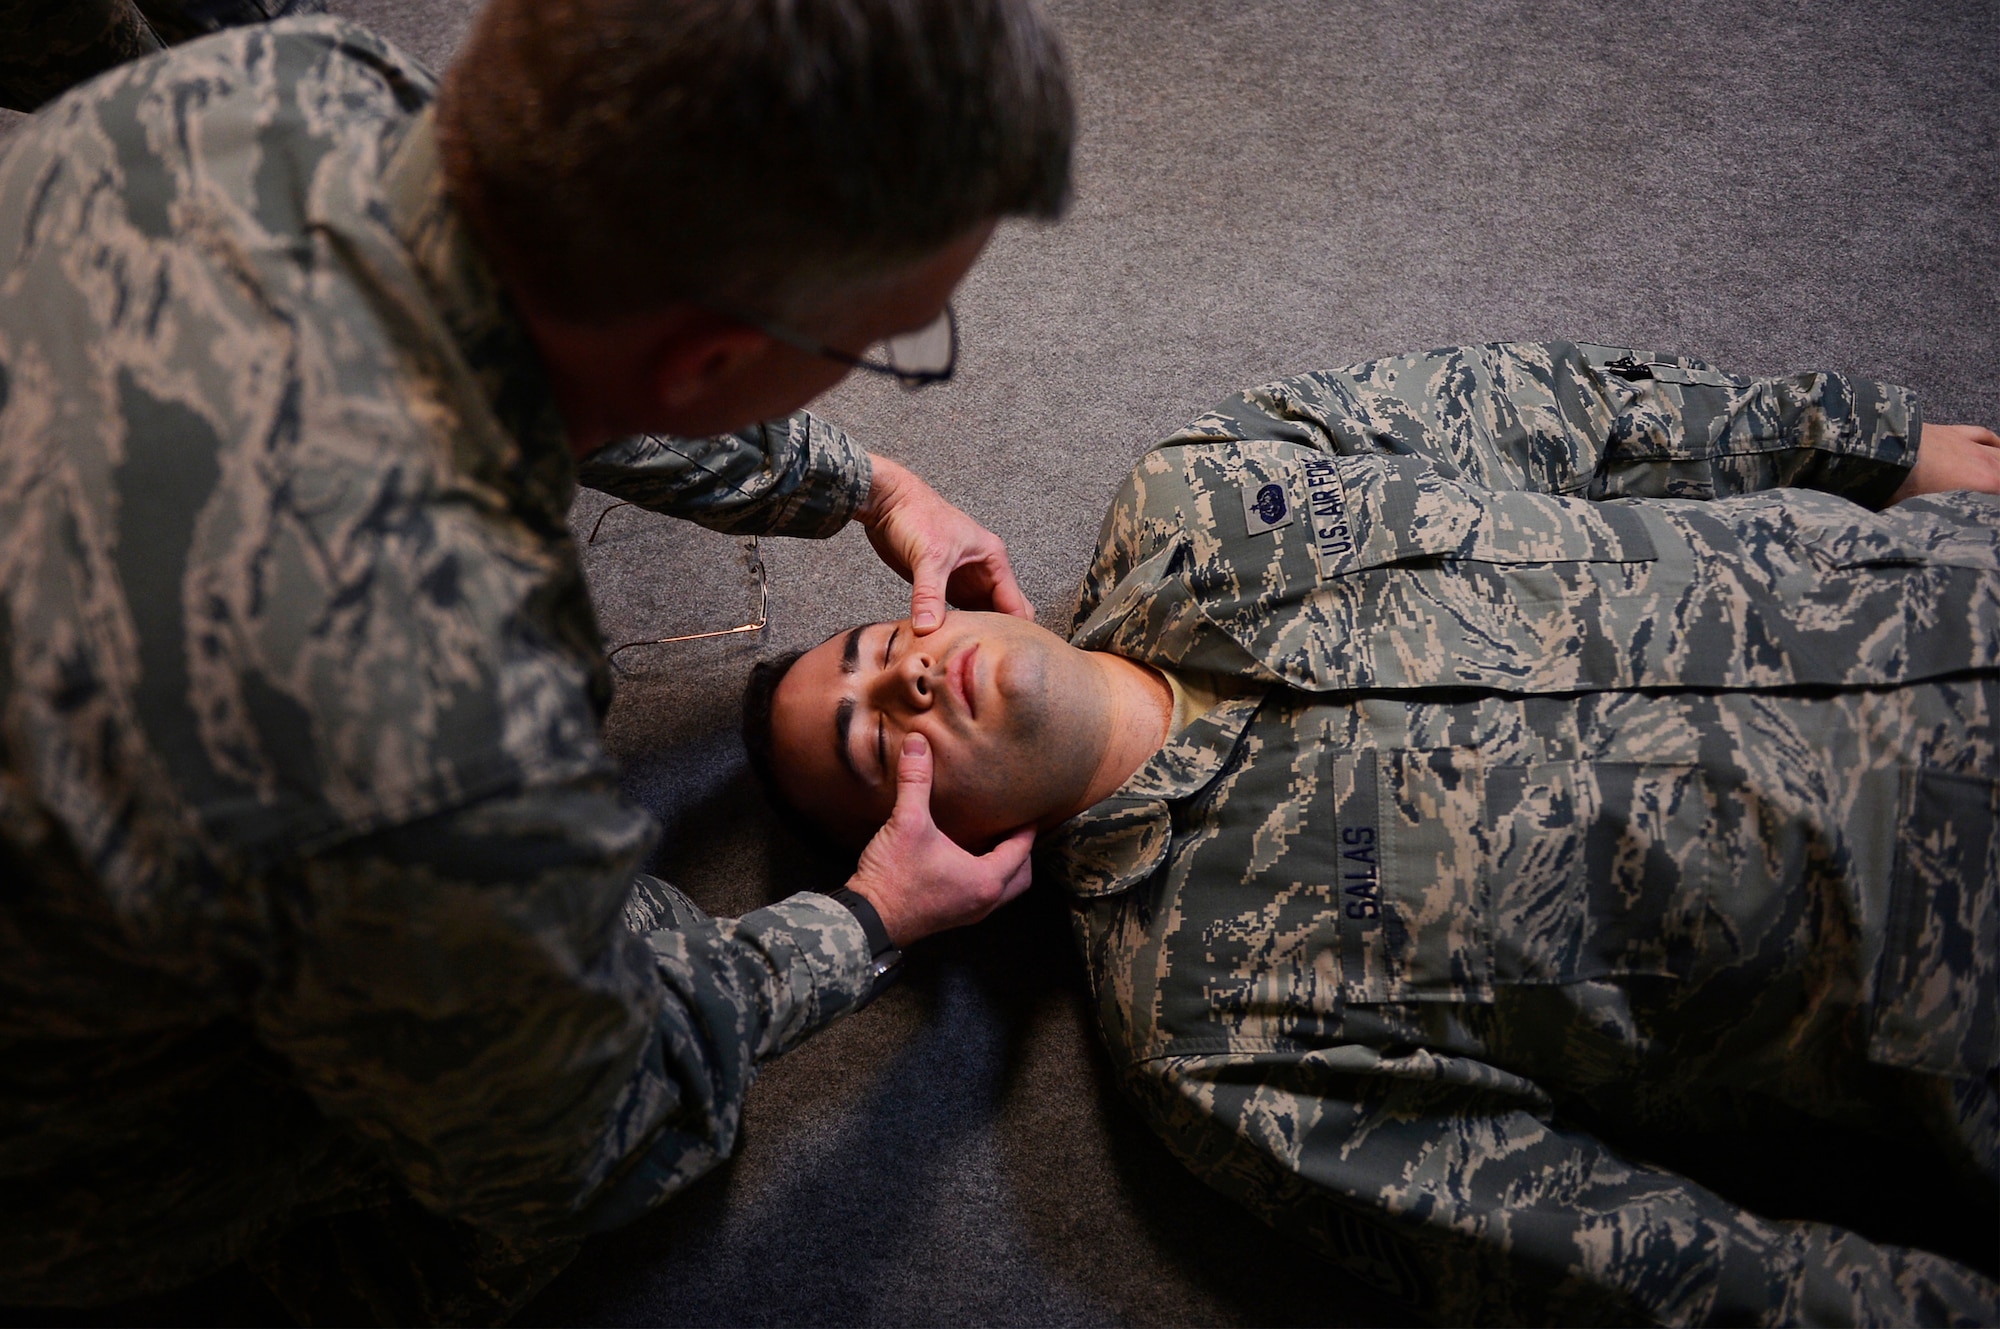 U.S. Air Force Capt. Jeremy Bull, 313th Expeditionary Operations Support Squadron flight nurse, demonstrates self-aid buddy care techniques on U.S. Air Force Tech. Sgt. Peter Salas, 313th EOSS systems administrator, during a training day on Ramstein Air Base, Germany, Feb. 16, 2018. The 313th EOSS is part of the 721st Air Mobility Operations Group, which supported more than 4,500 aircraft coming through Ramstein over the past year. (U.S. Air Force photo by Senior Airman Joshua Magbanua)